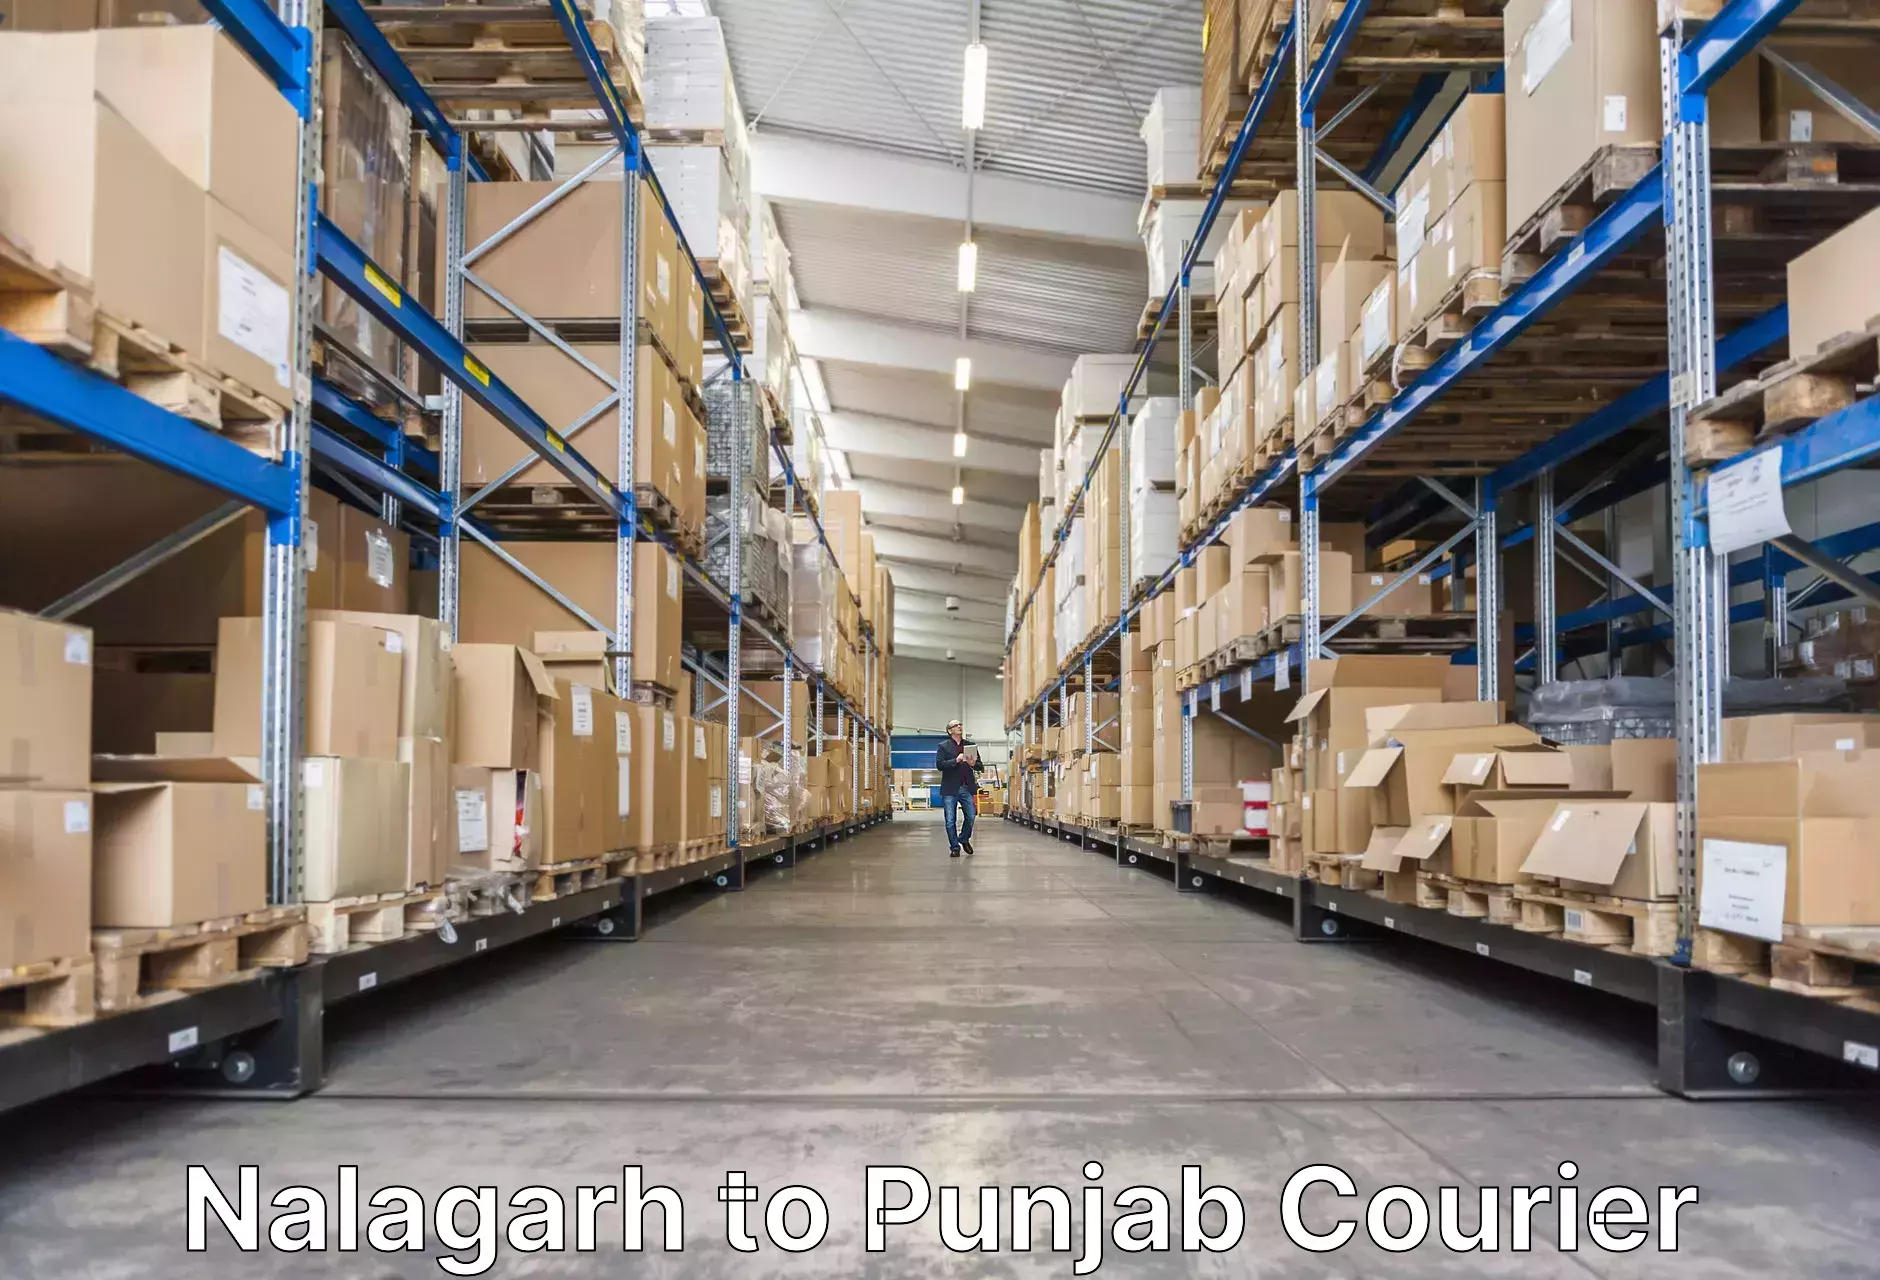 Instant baggage transport quote Nalagarh to Thapar Institute of Engineering and Technology Patiala